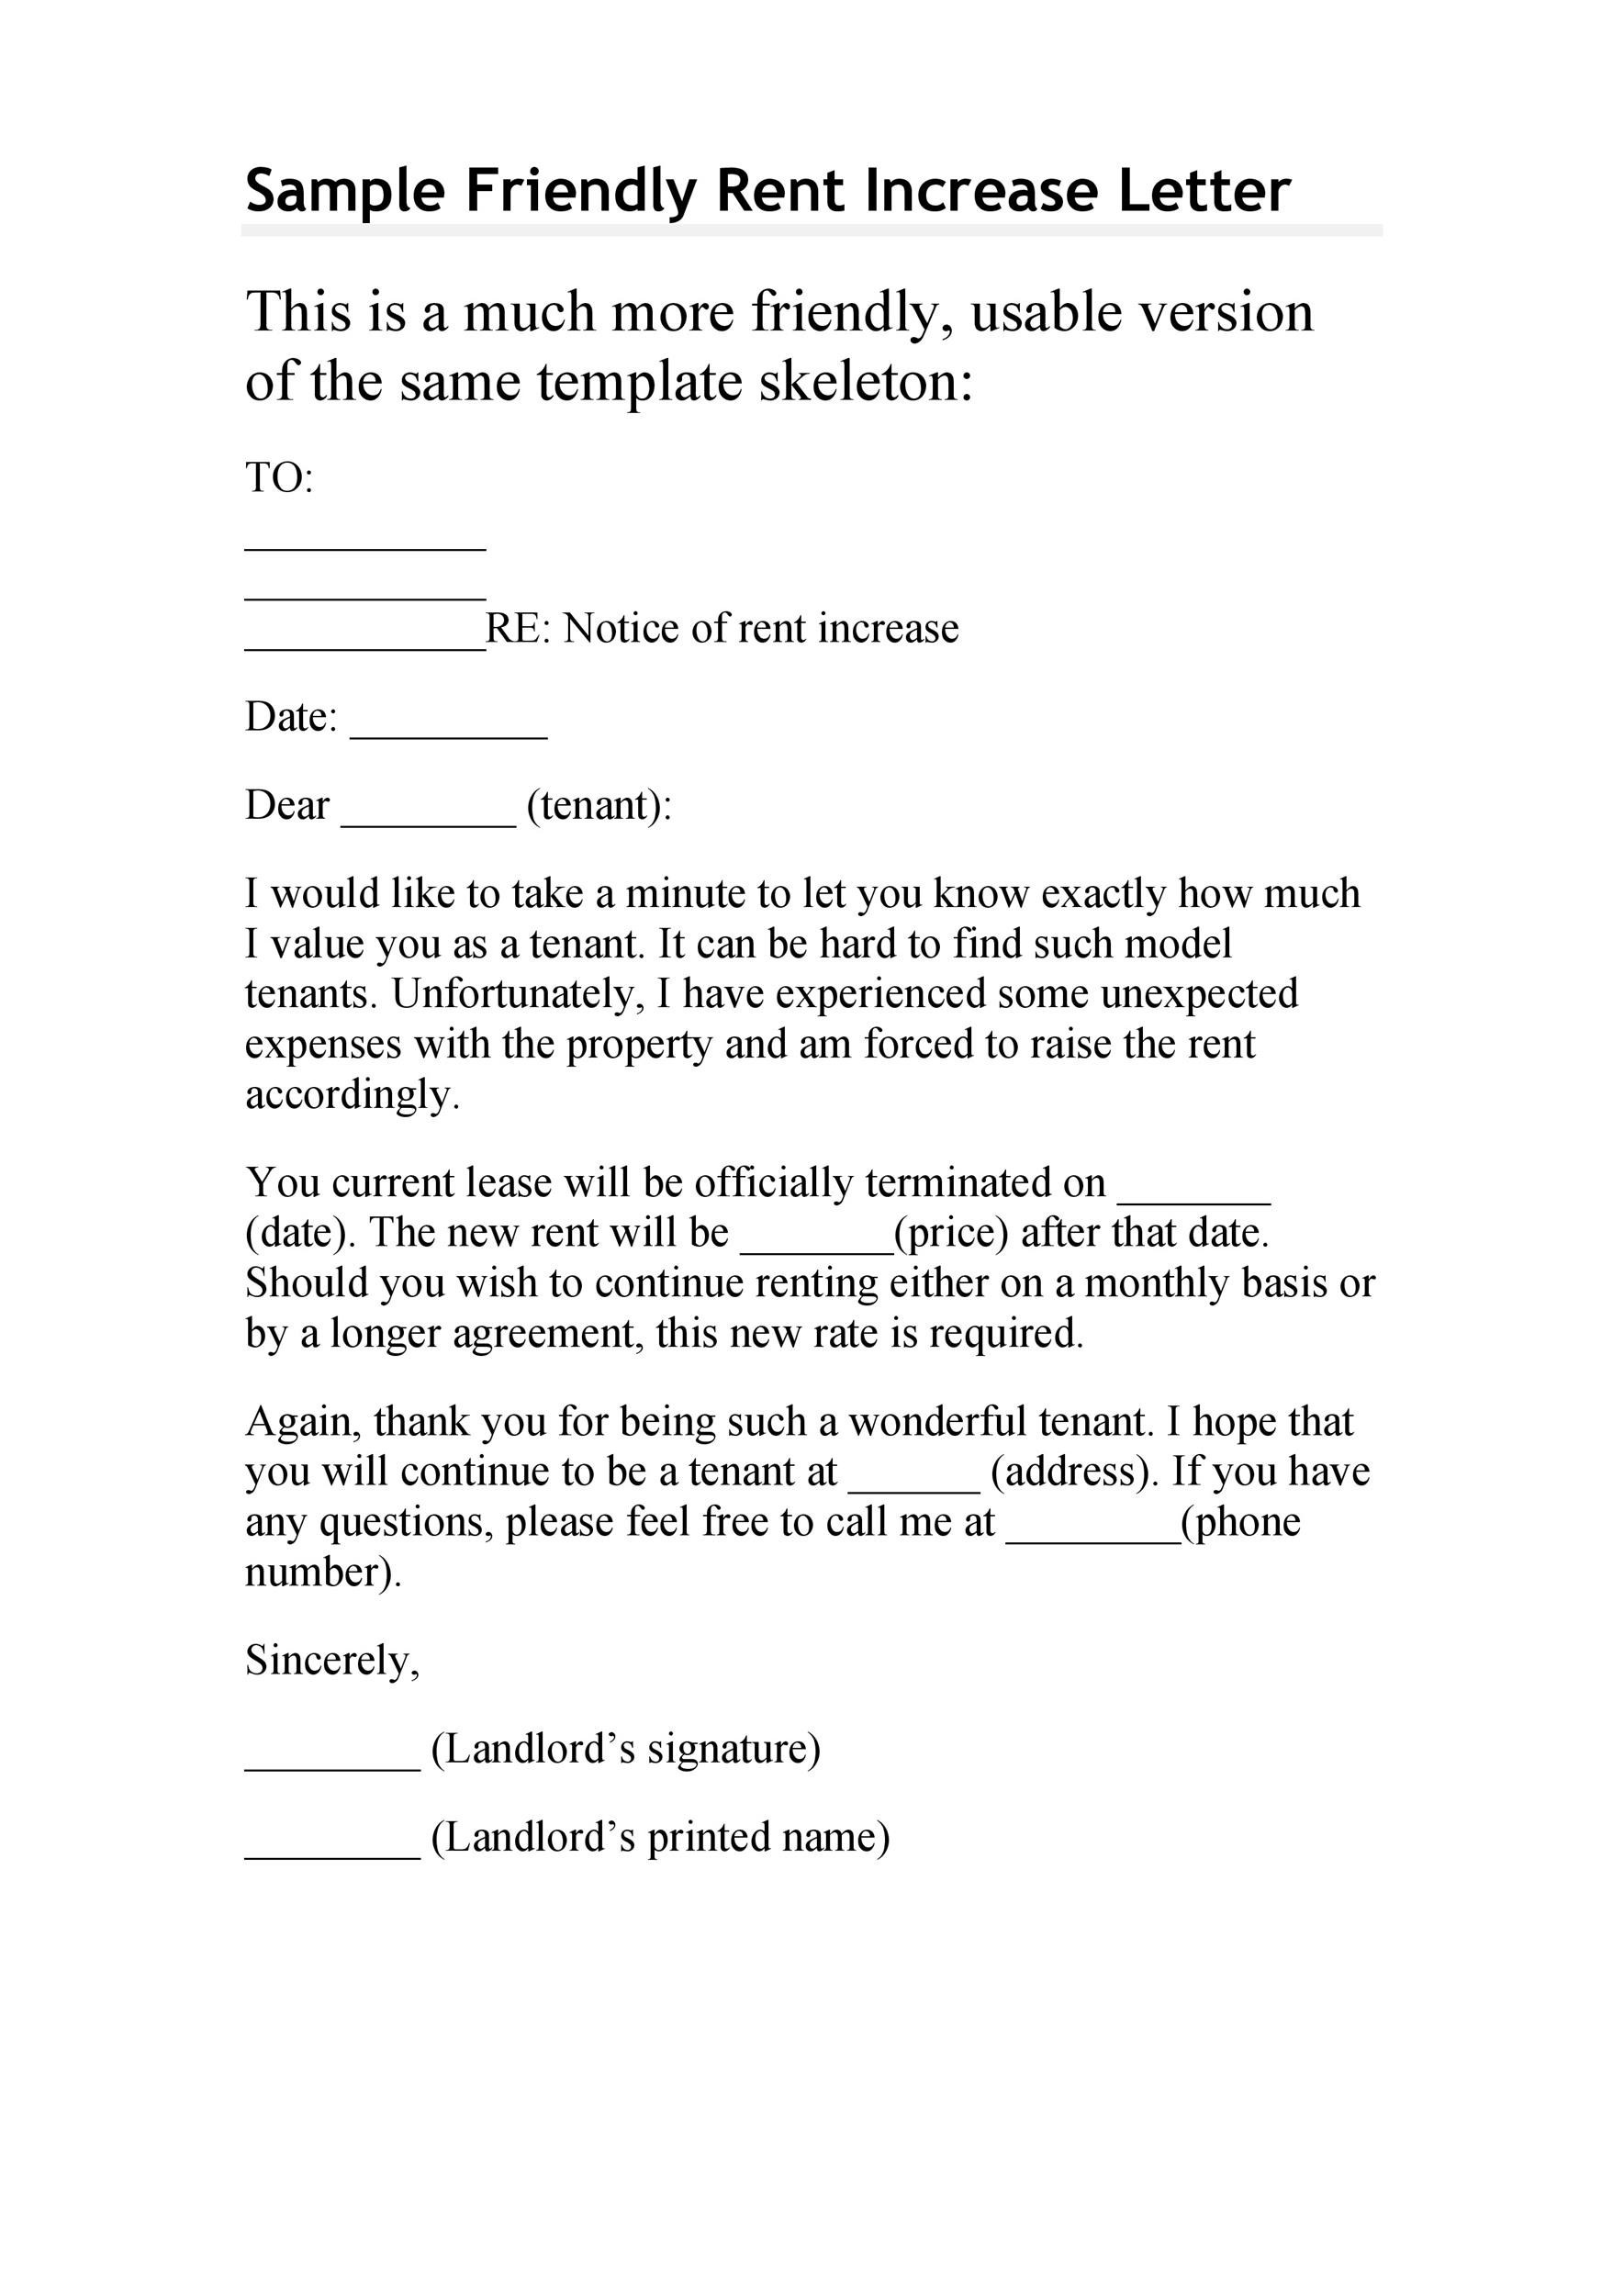 Rent Increase Letter Template 46 Friendly Rent Increase Letters Free Samples Templatelab